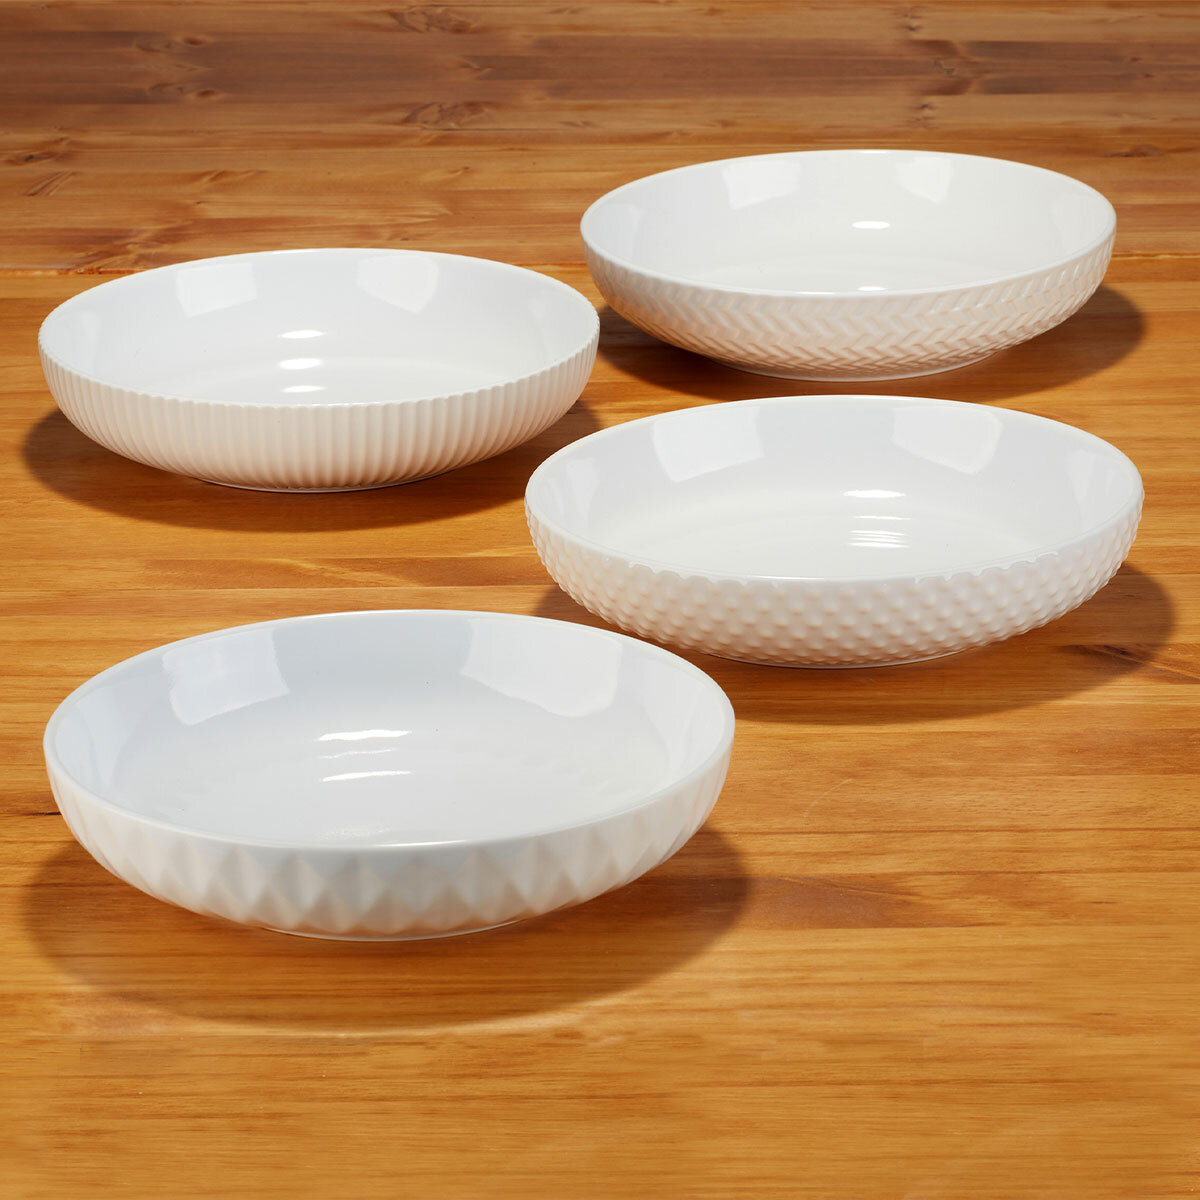 4 bowls laid out on table empty